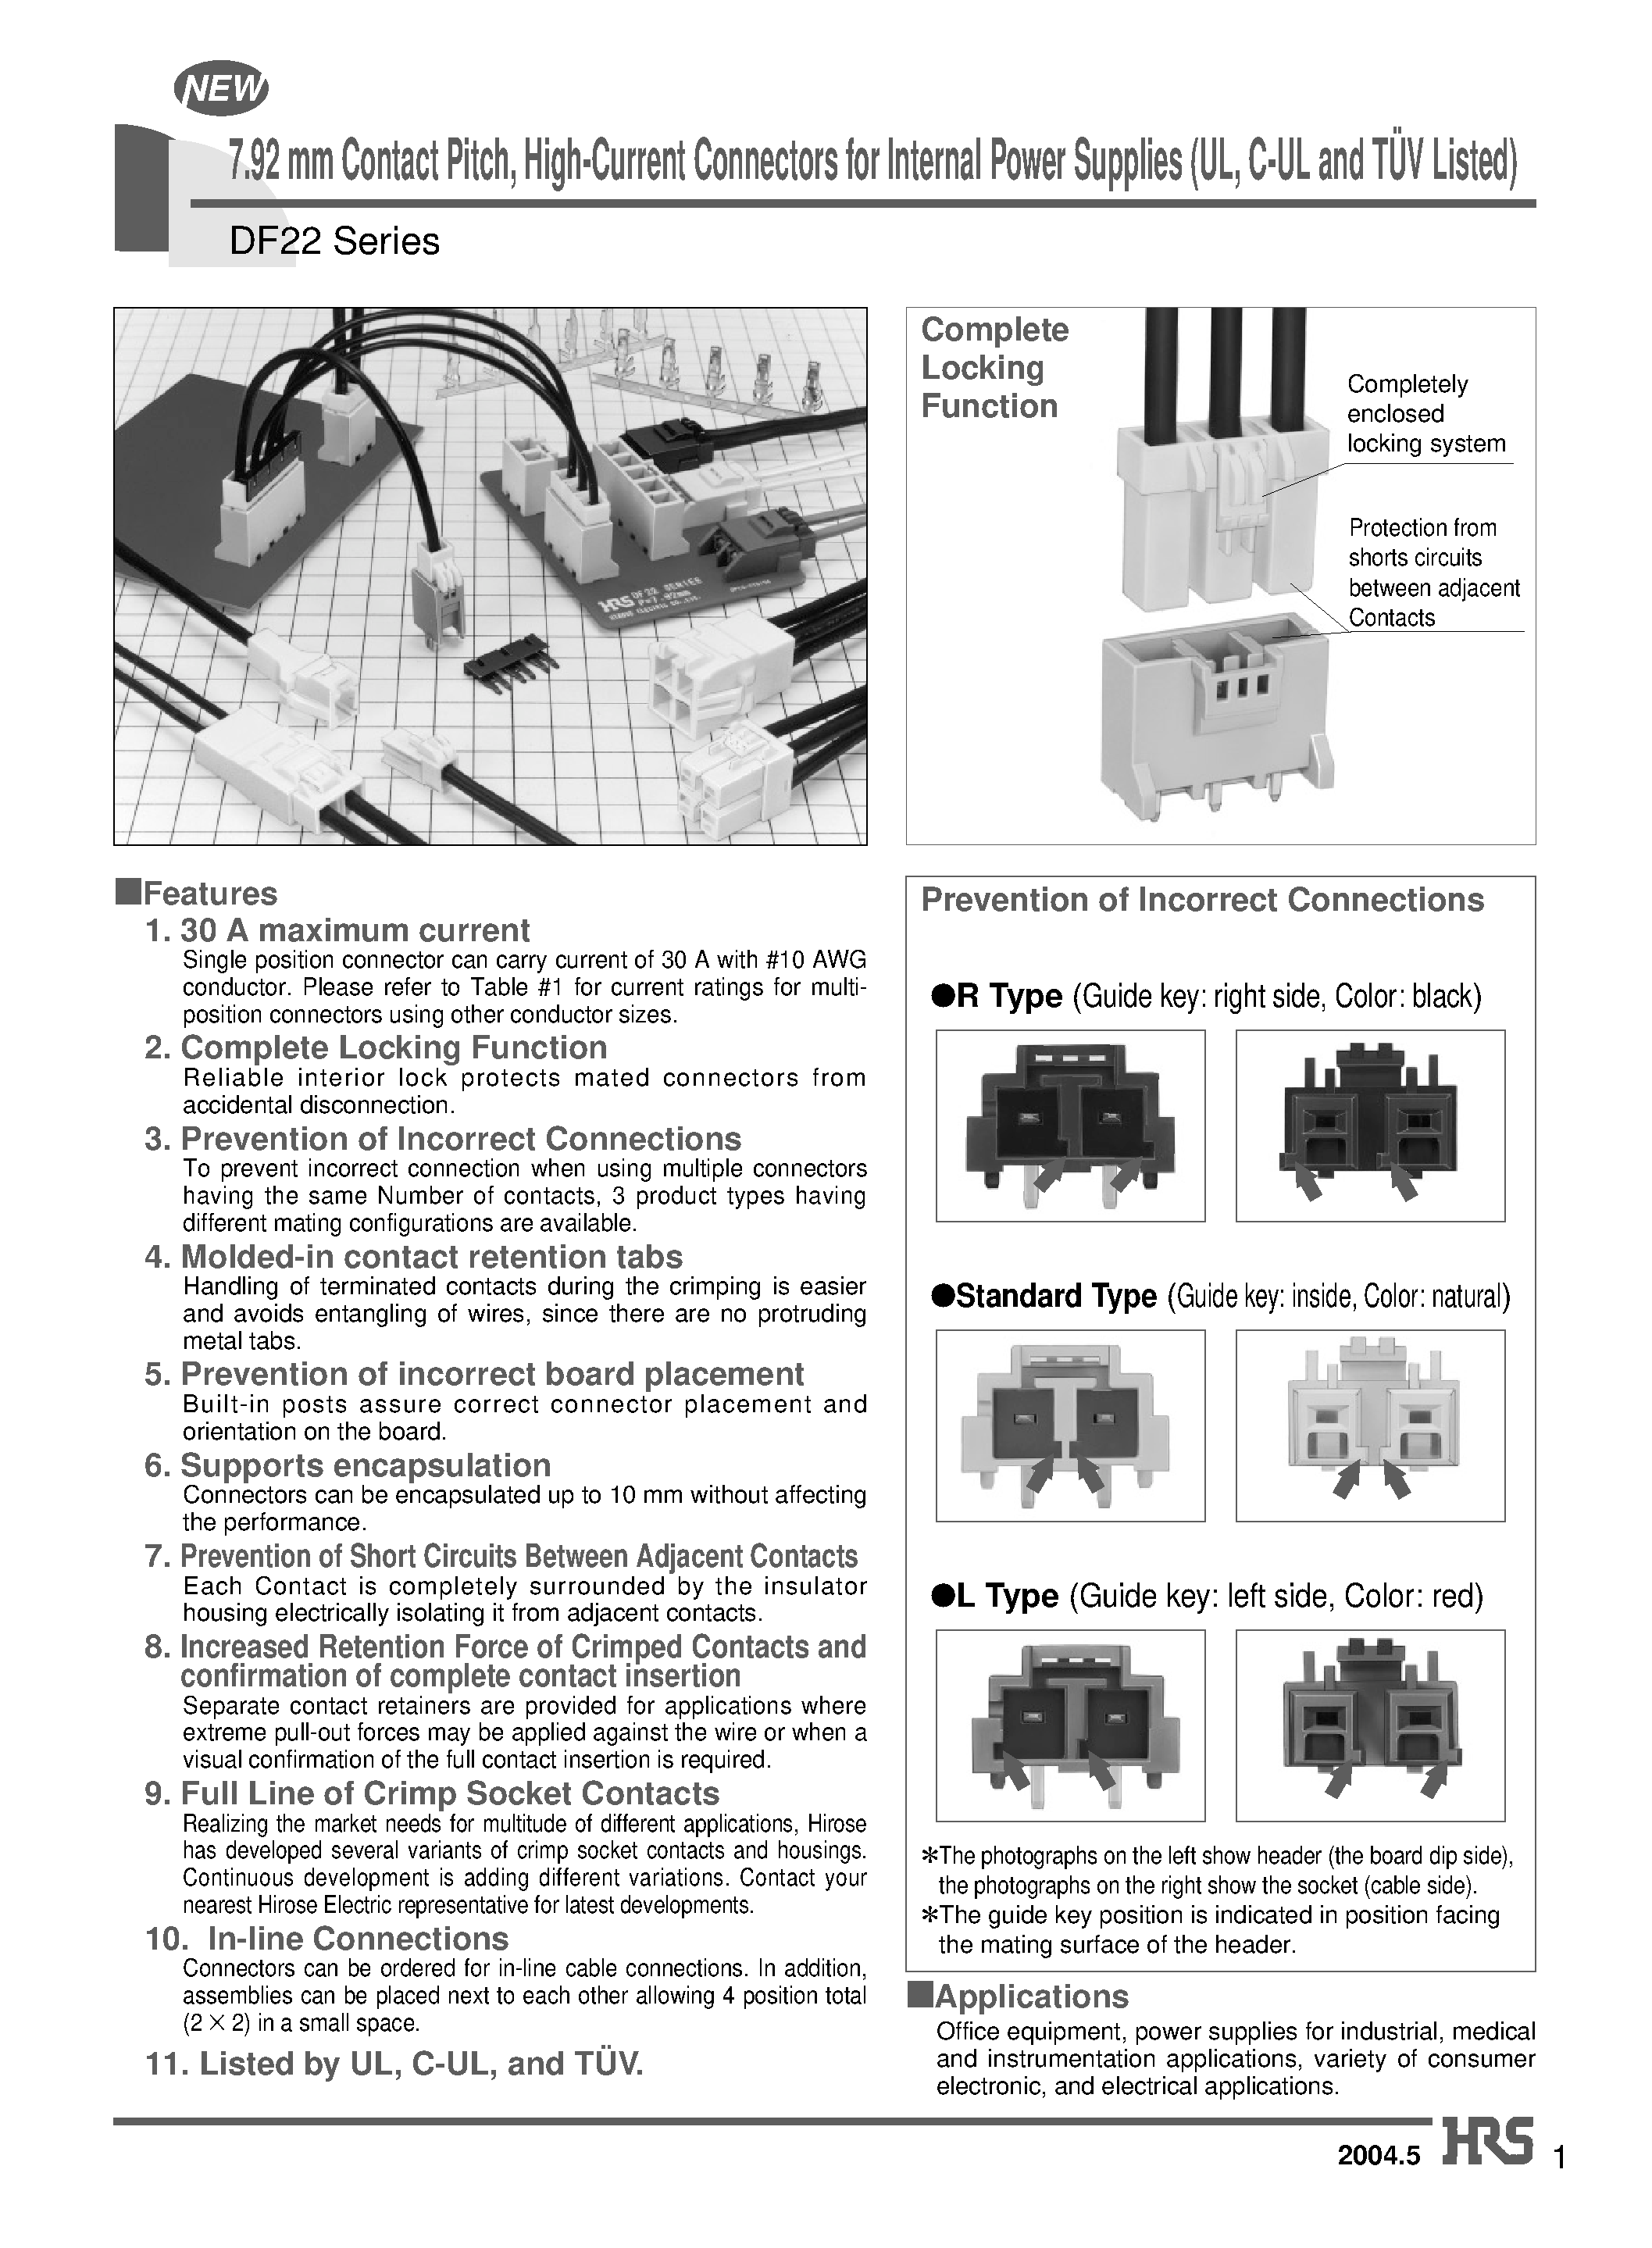 Datasheet DF22-4P-7.92DSA - 7.92 mm Contact Pitch/ High-Current Connectors for Internal Power Supplies (UL/ C-UL and TUV Listed) page 1